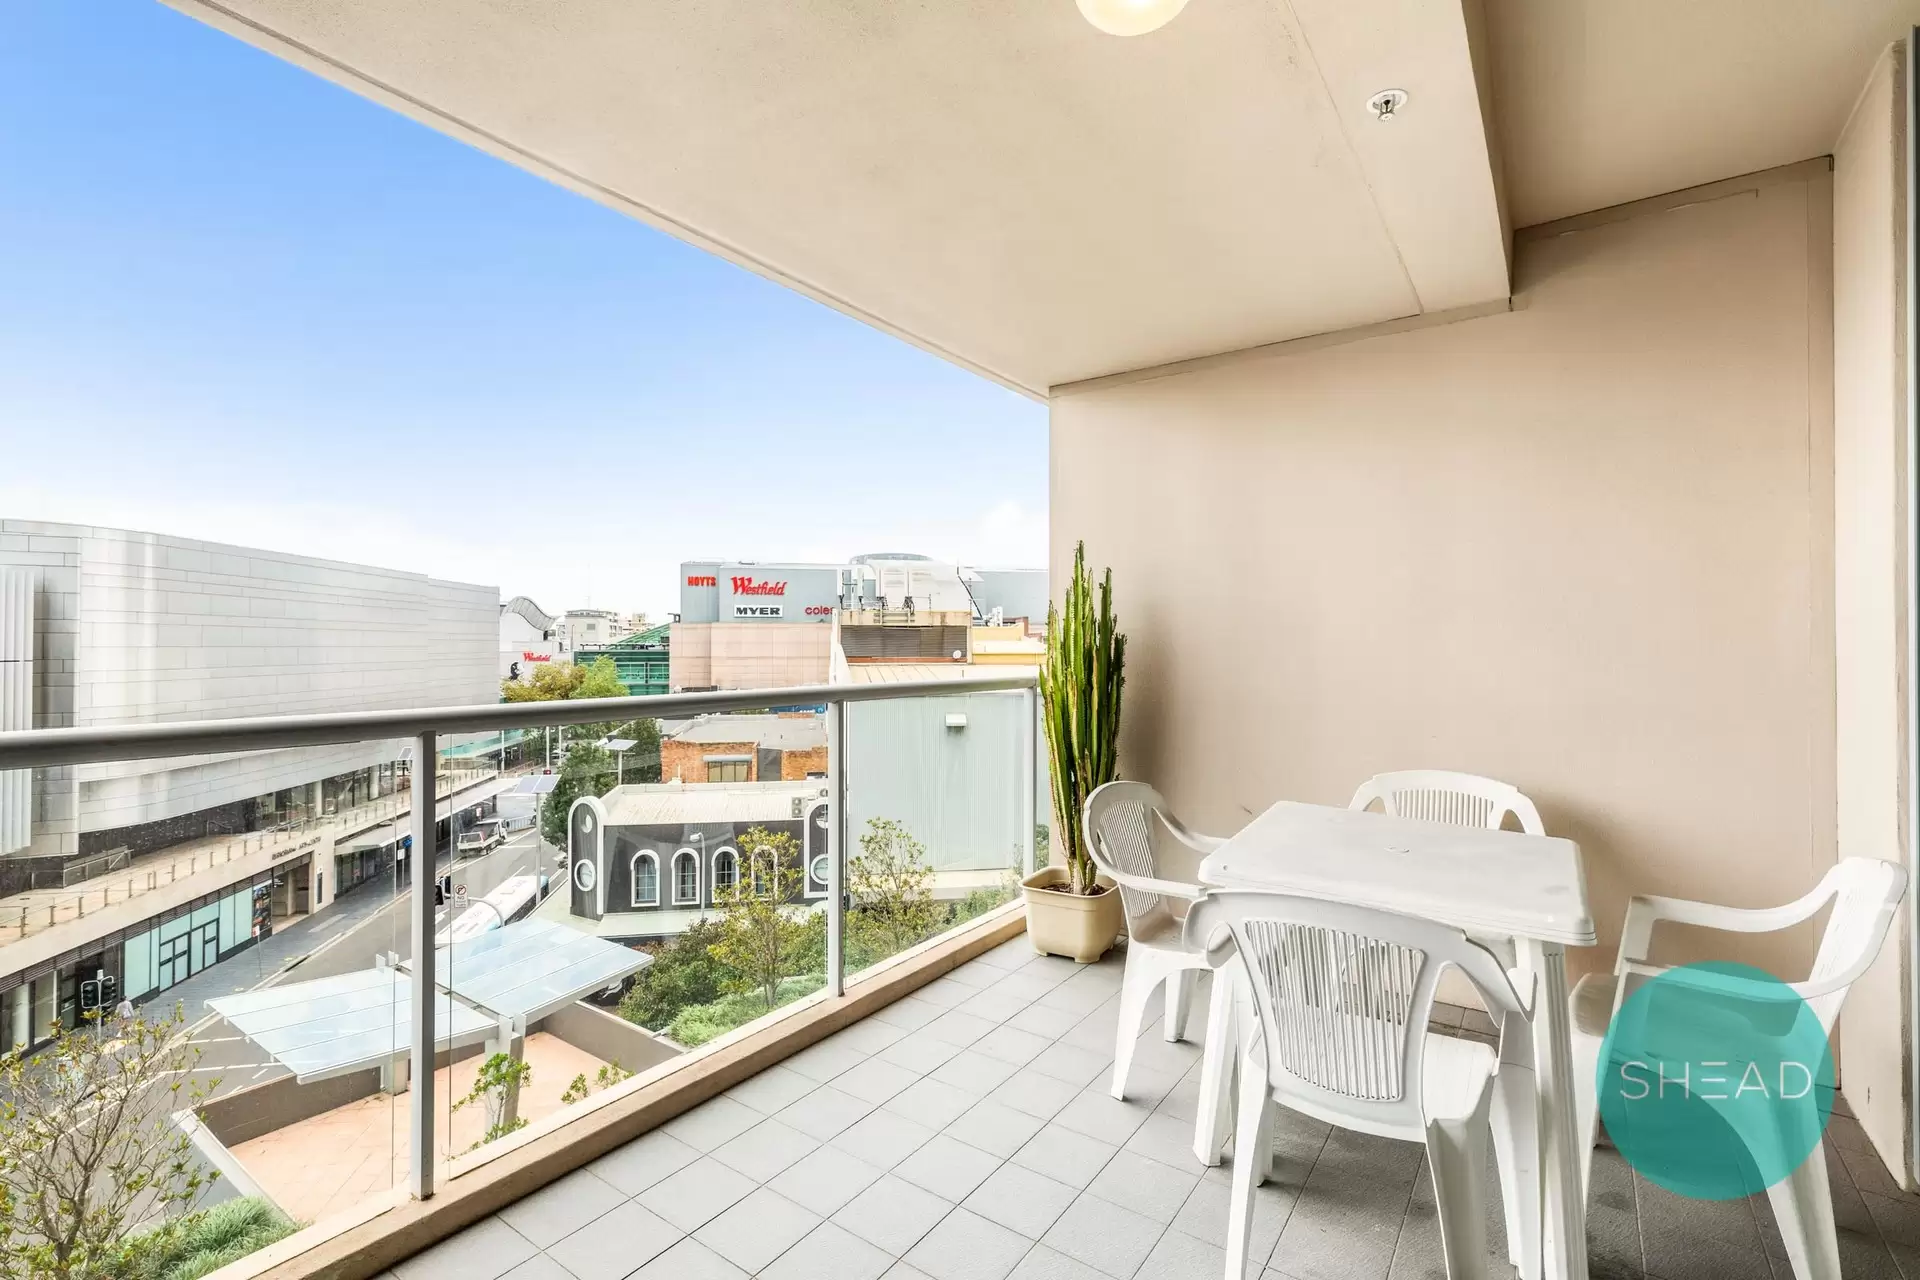 B518/2B Help Street, Chatswood For Lease by Shead Property - image 1